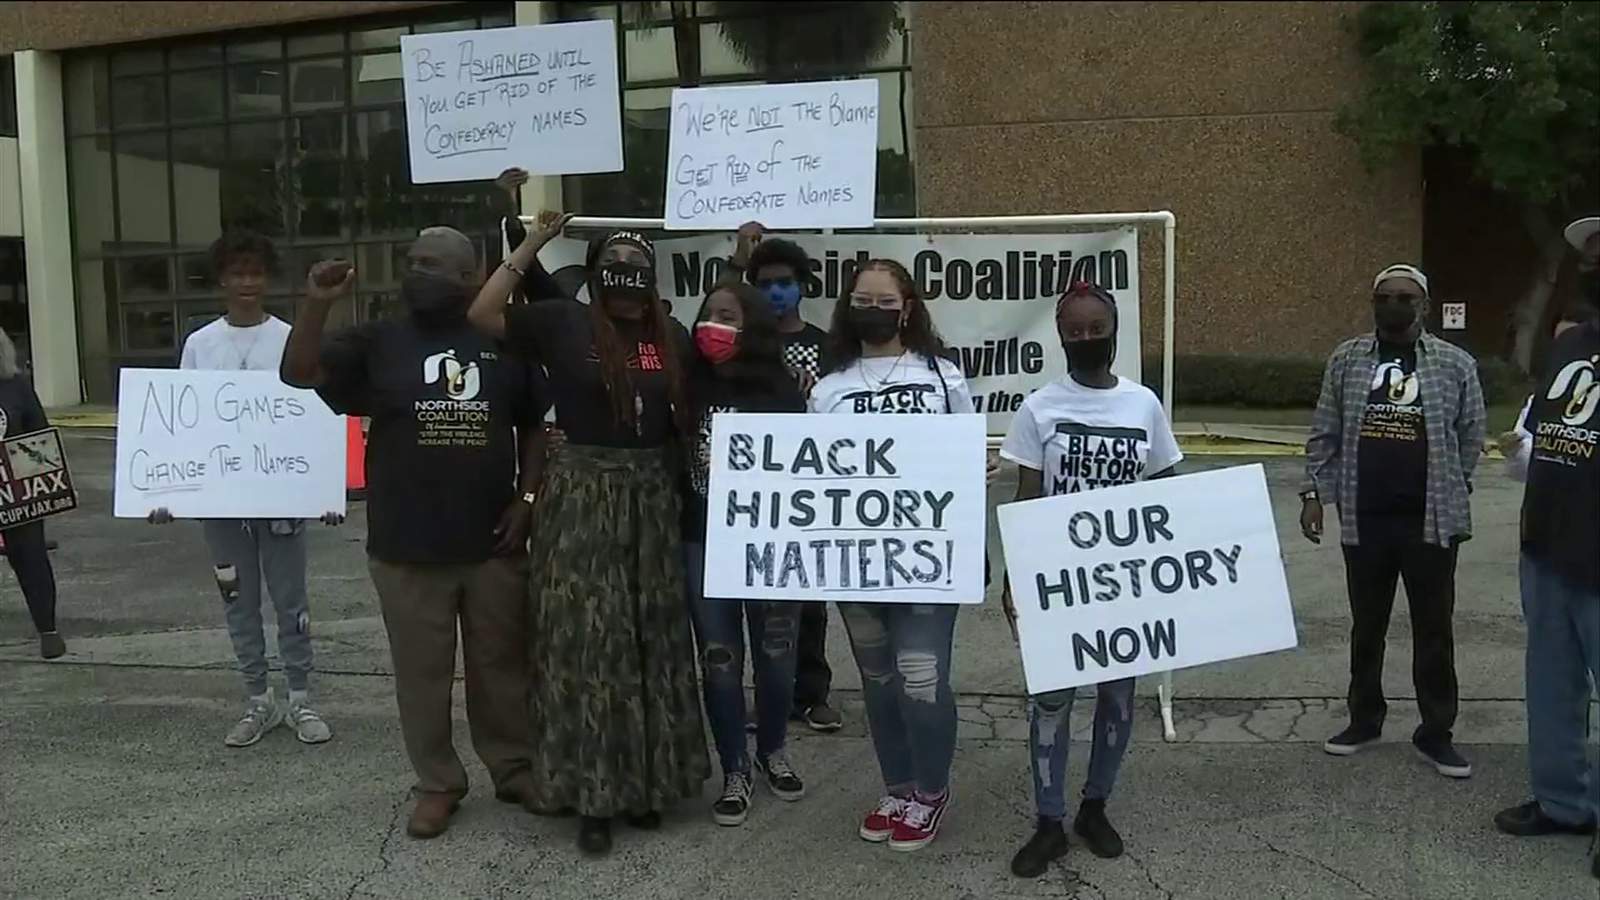 Students protest, call for more Black history in Duval County schools